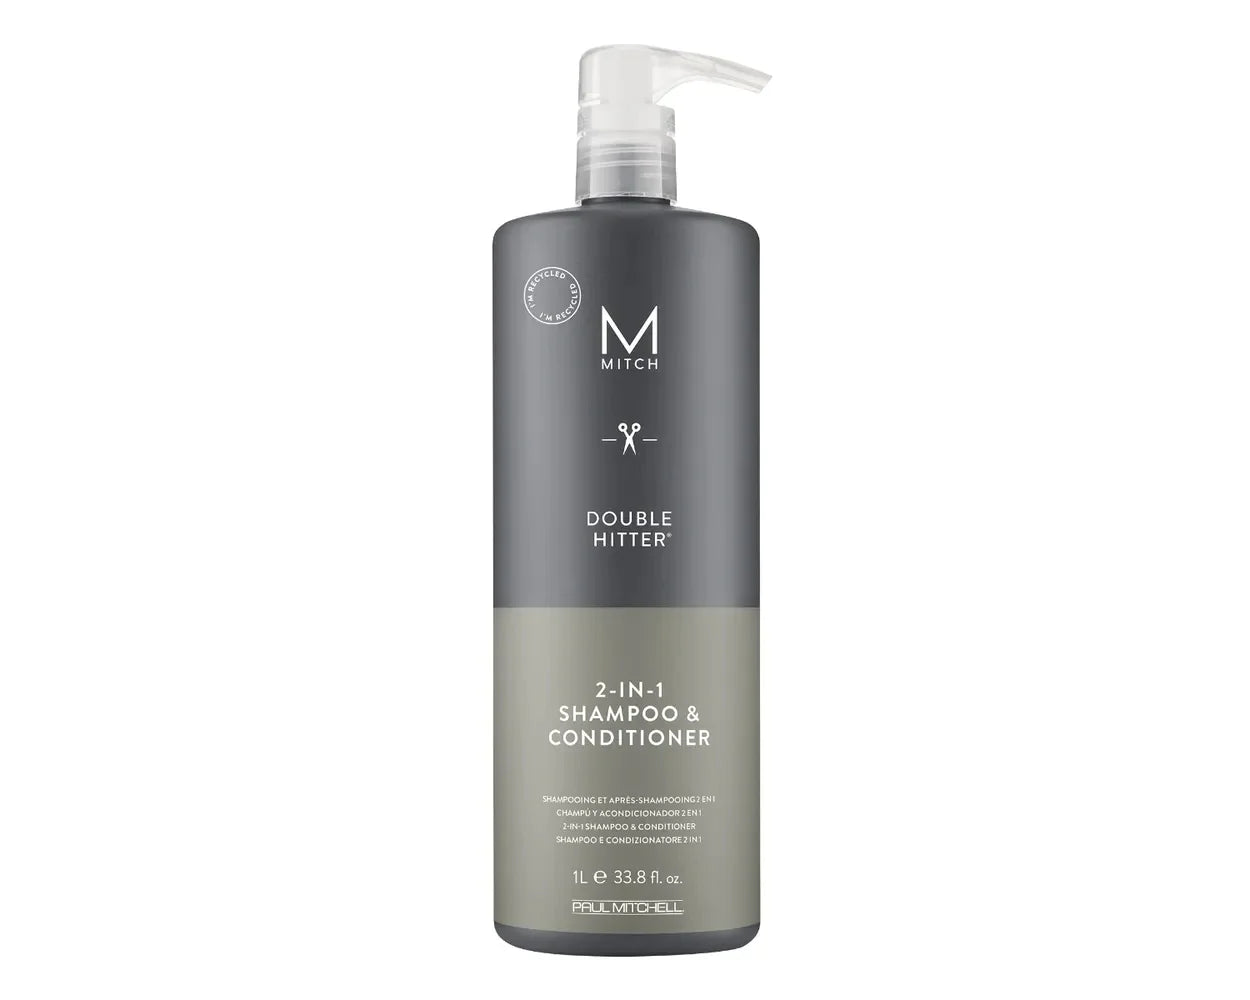 Paul Mitchell Mitch Double Hitter - Shampoo & Conditioner 2-in-1 1000ml